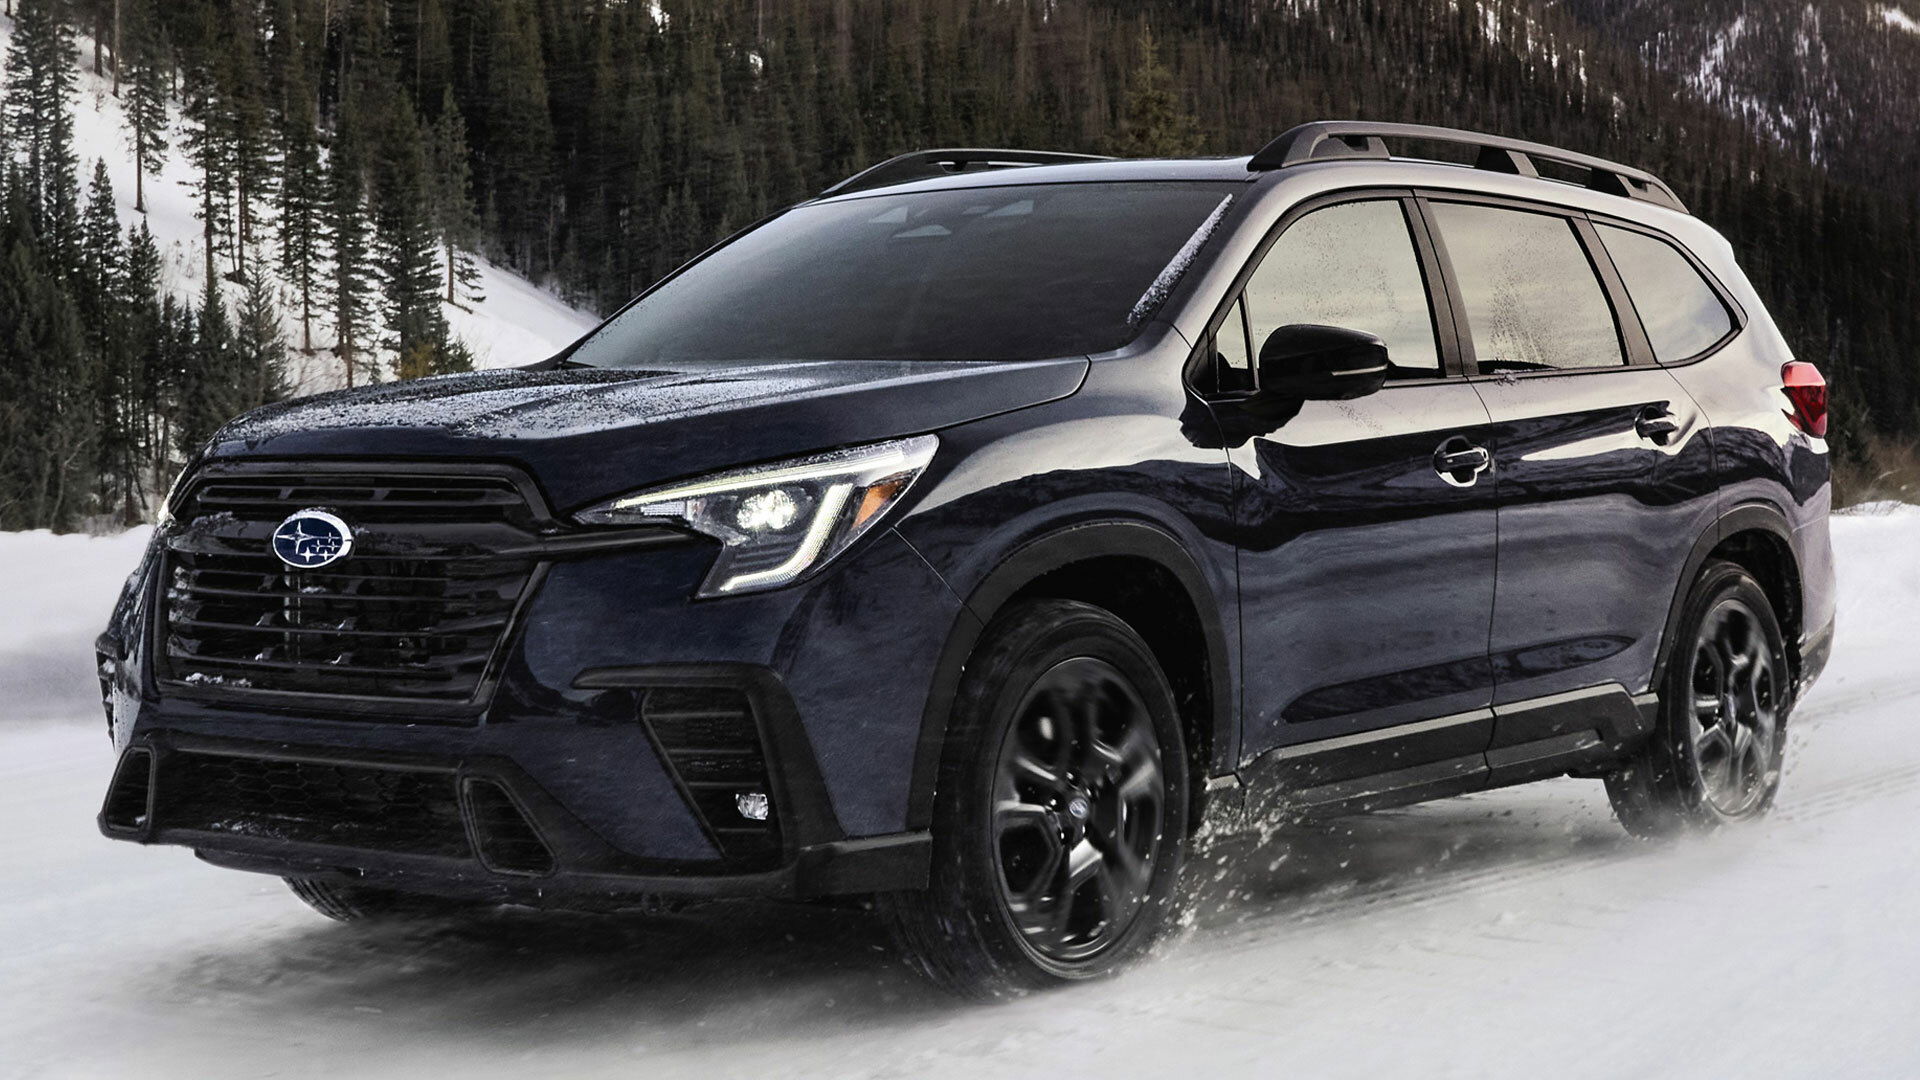 2024 Subaru Ascent is great for winter driving.